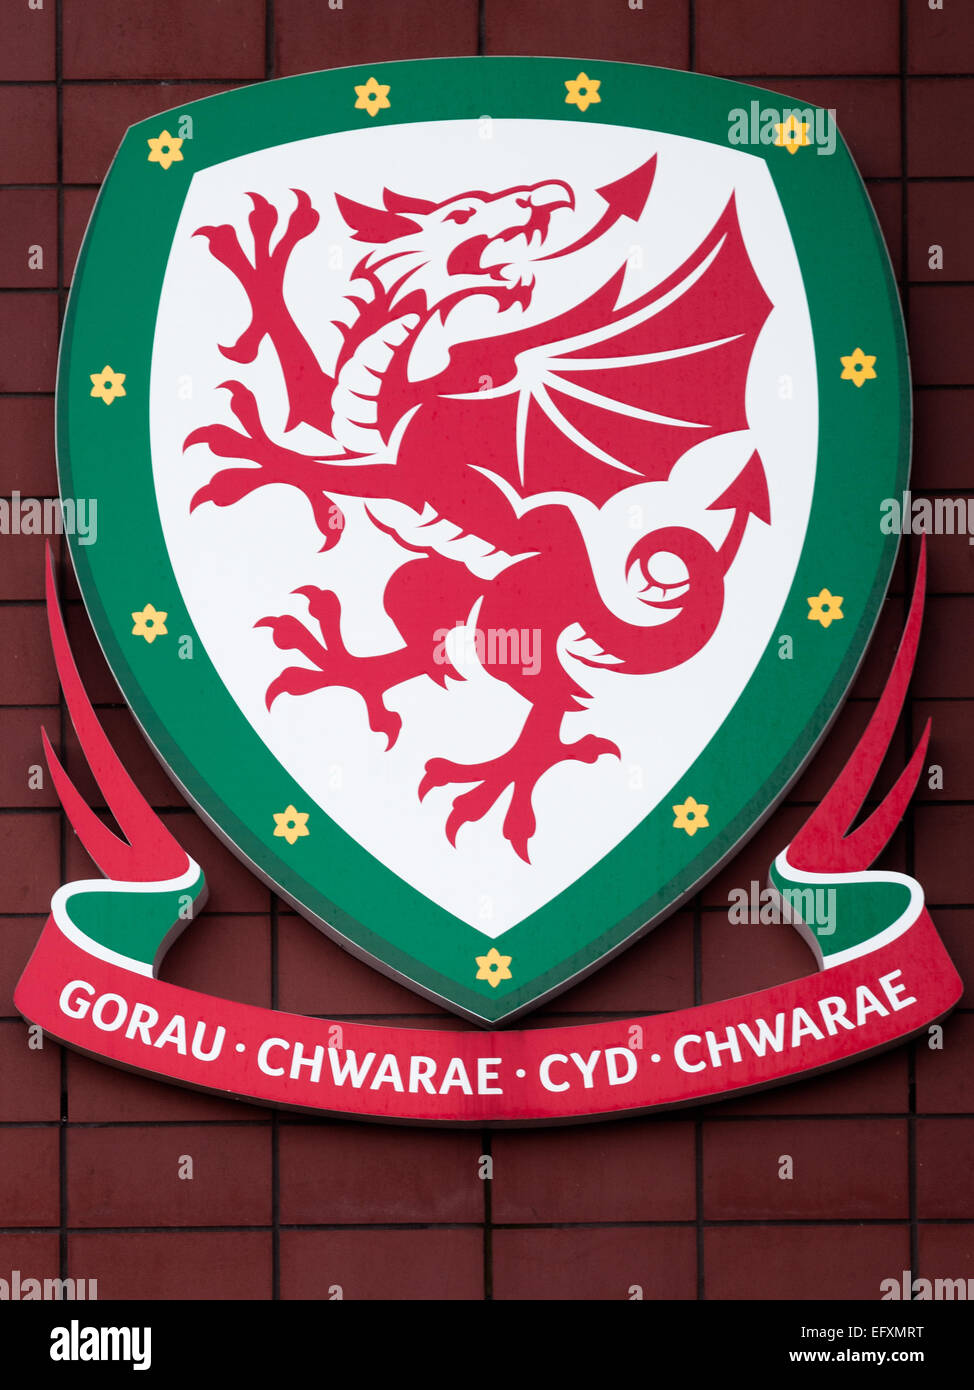 An emblem relating football and the message 'Together Stronger' or 'To play Together The best'  featured prominently in Welsh. Stock Photo